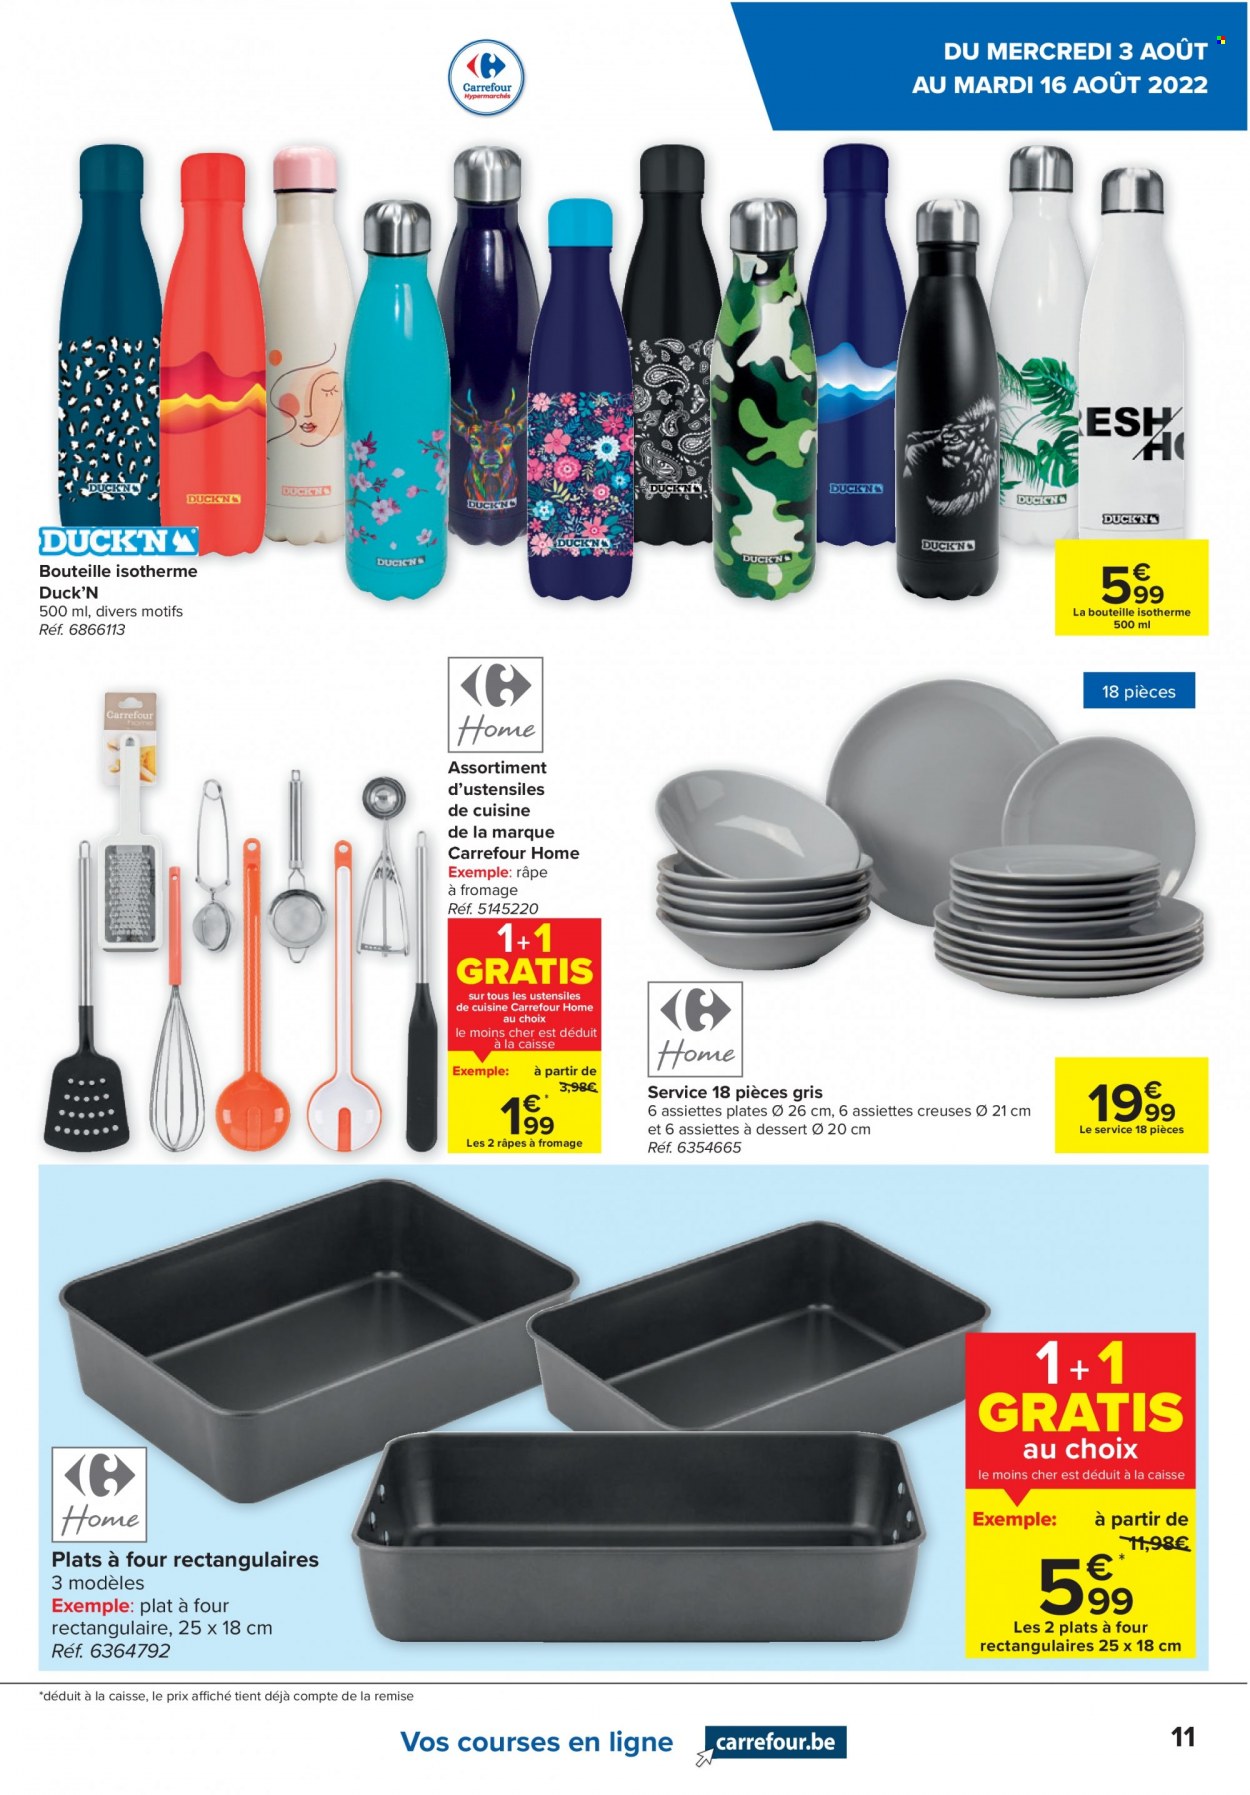 Catalogue Carrefour hypermarkt - 3.8.2022 - 16.8.2022. Page 11.